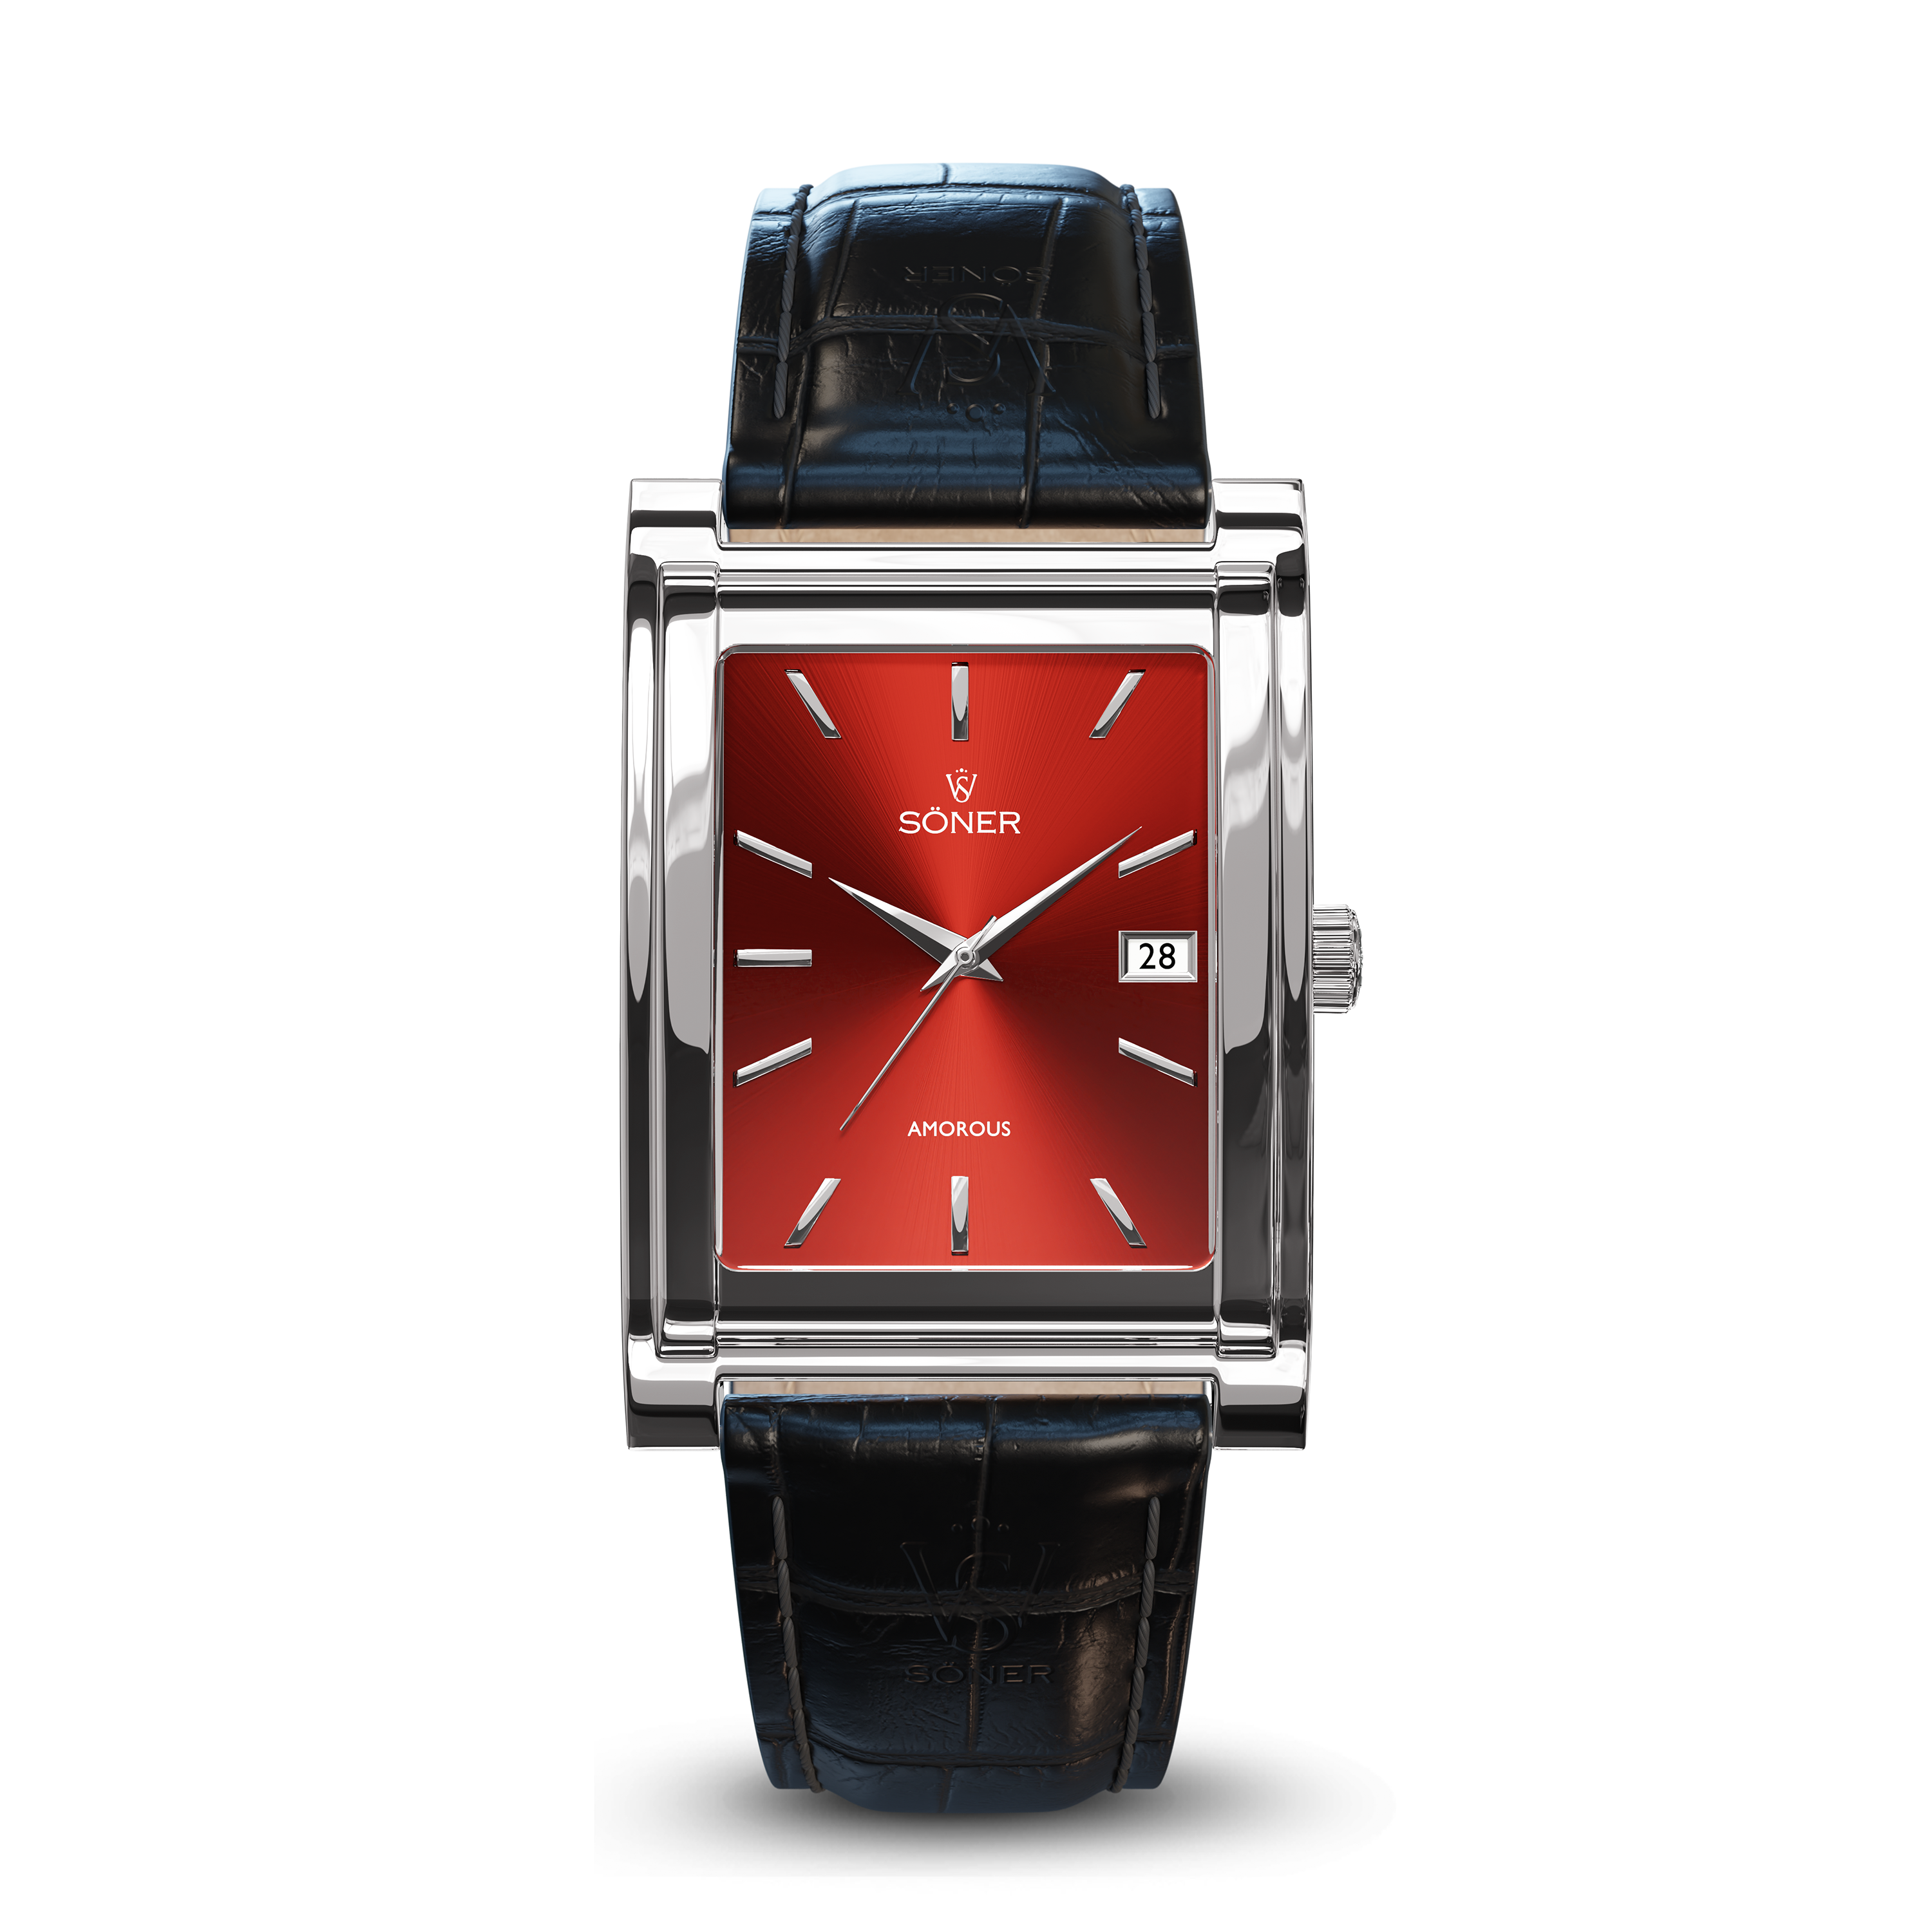 Square automatic watch, Amorous Rio with red dial - black alligator pattern leather strap front view